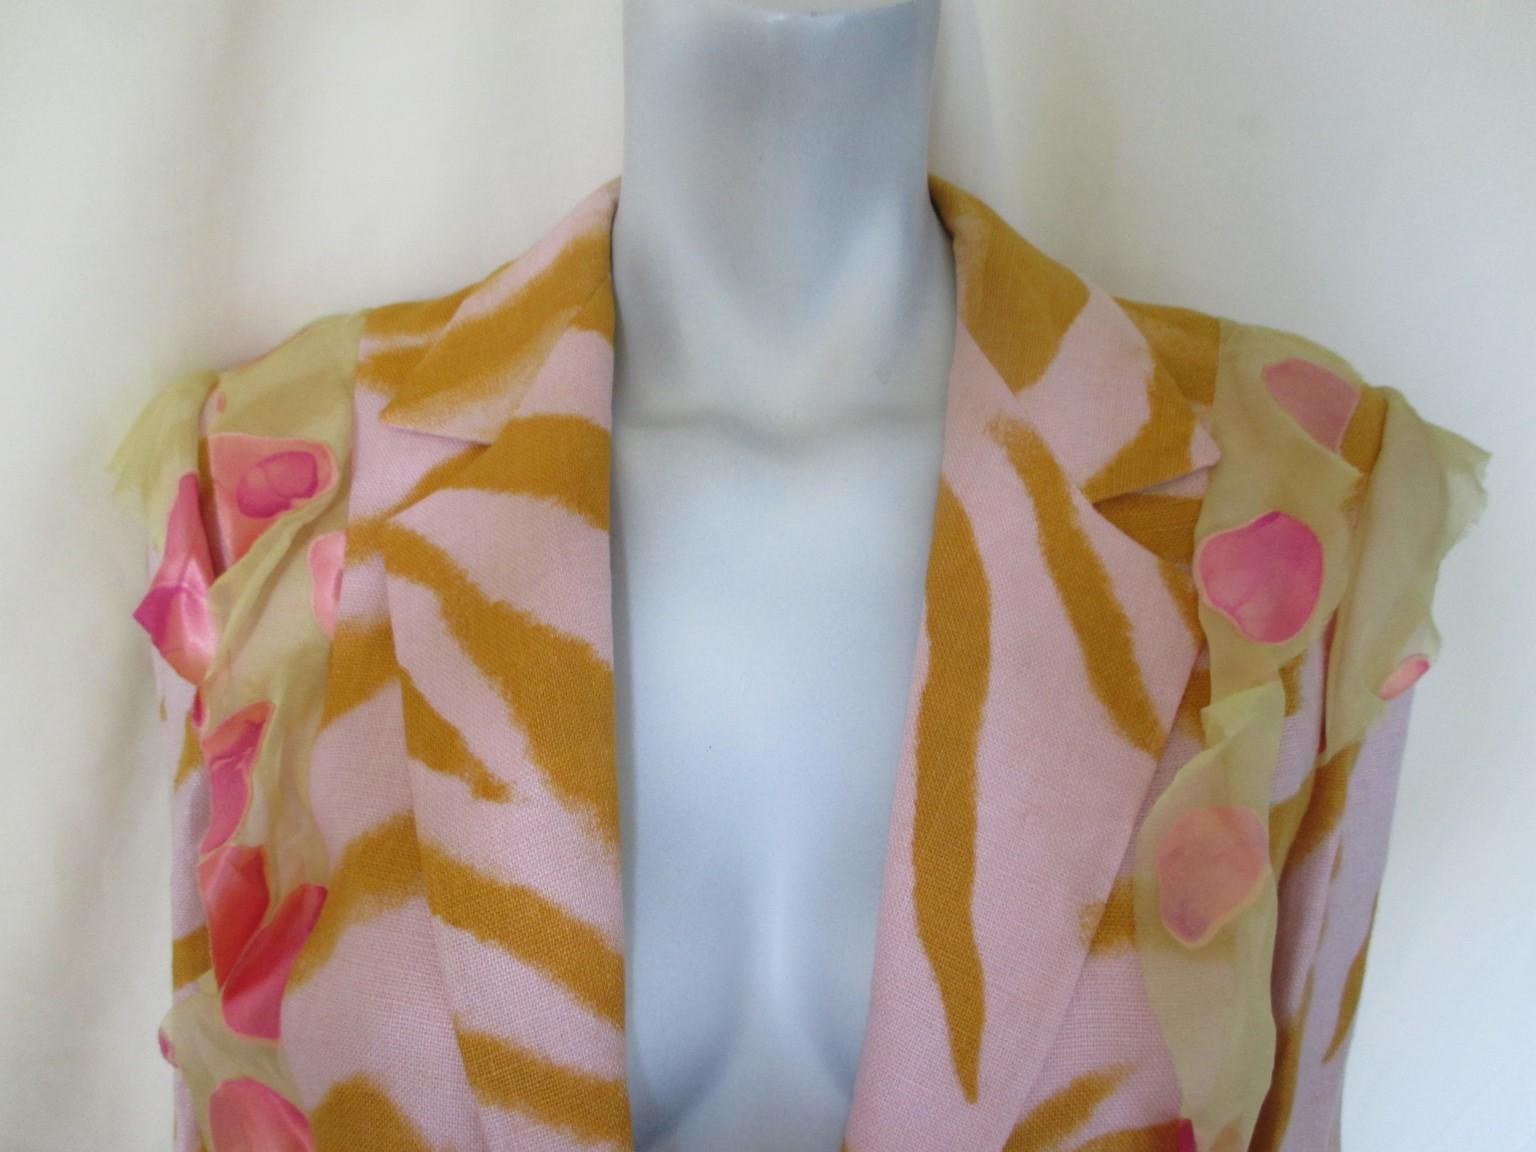 Vintage Emanuel Ungaro blazer trimmed with silk
The material is 100% linen and silk
No buttons
Good vintage condition
 Size is 38 France but fits about EU 36/ US 6-8
Please note that vintage items are not new and therefore might have minor